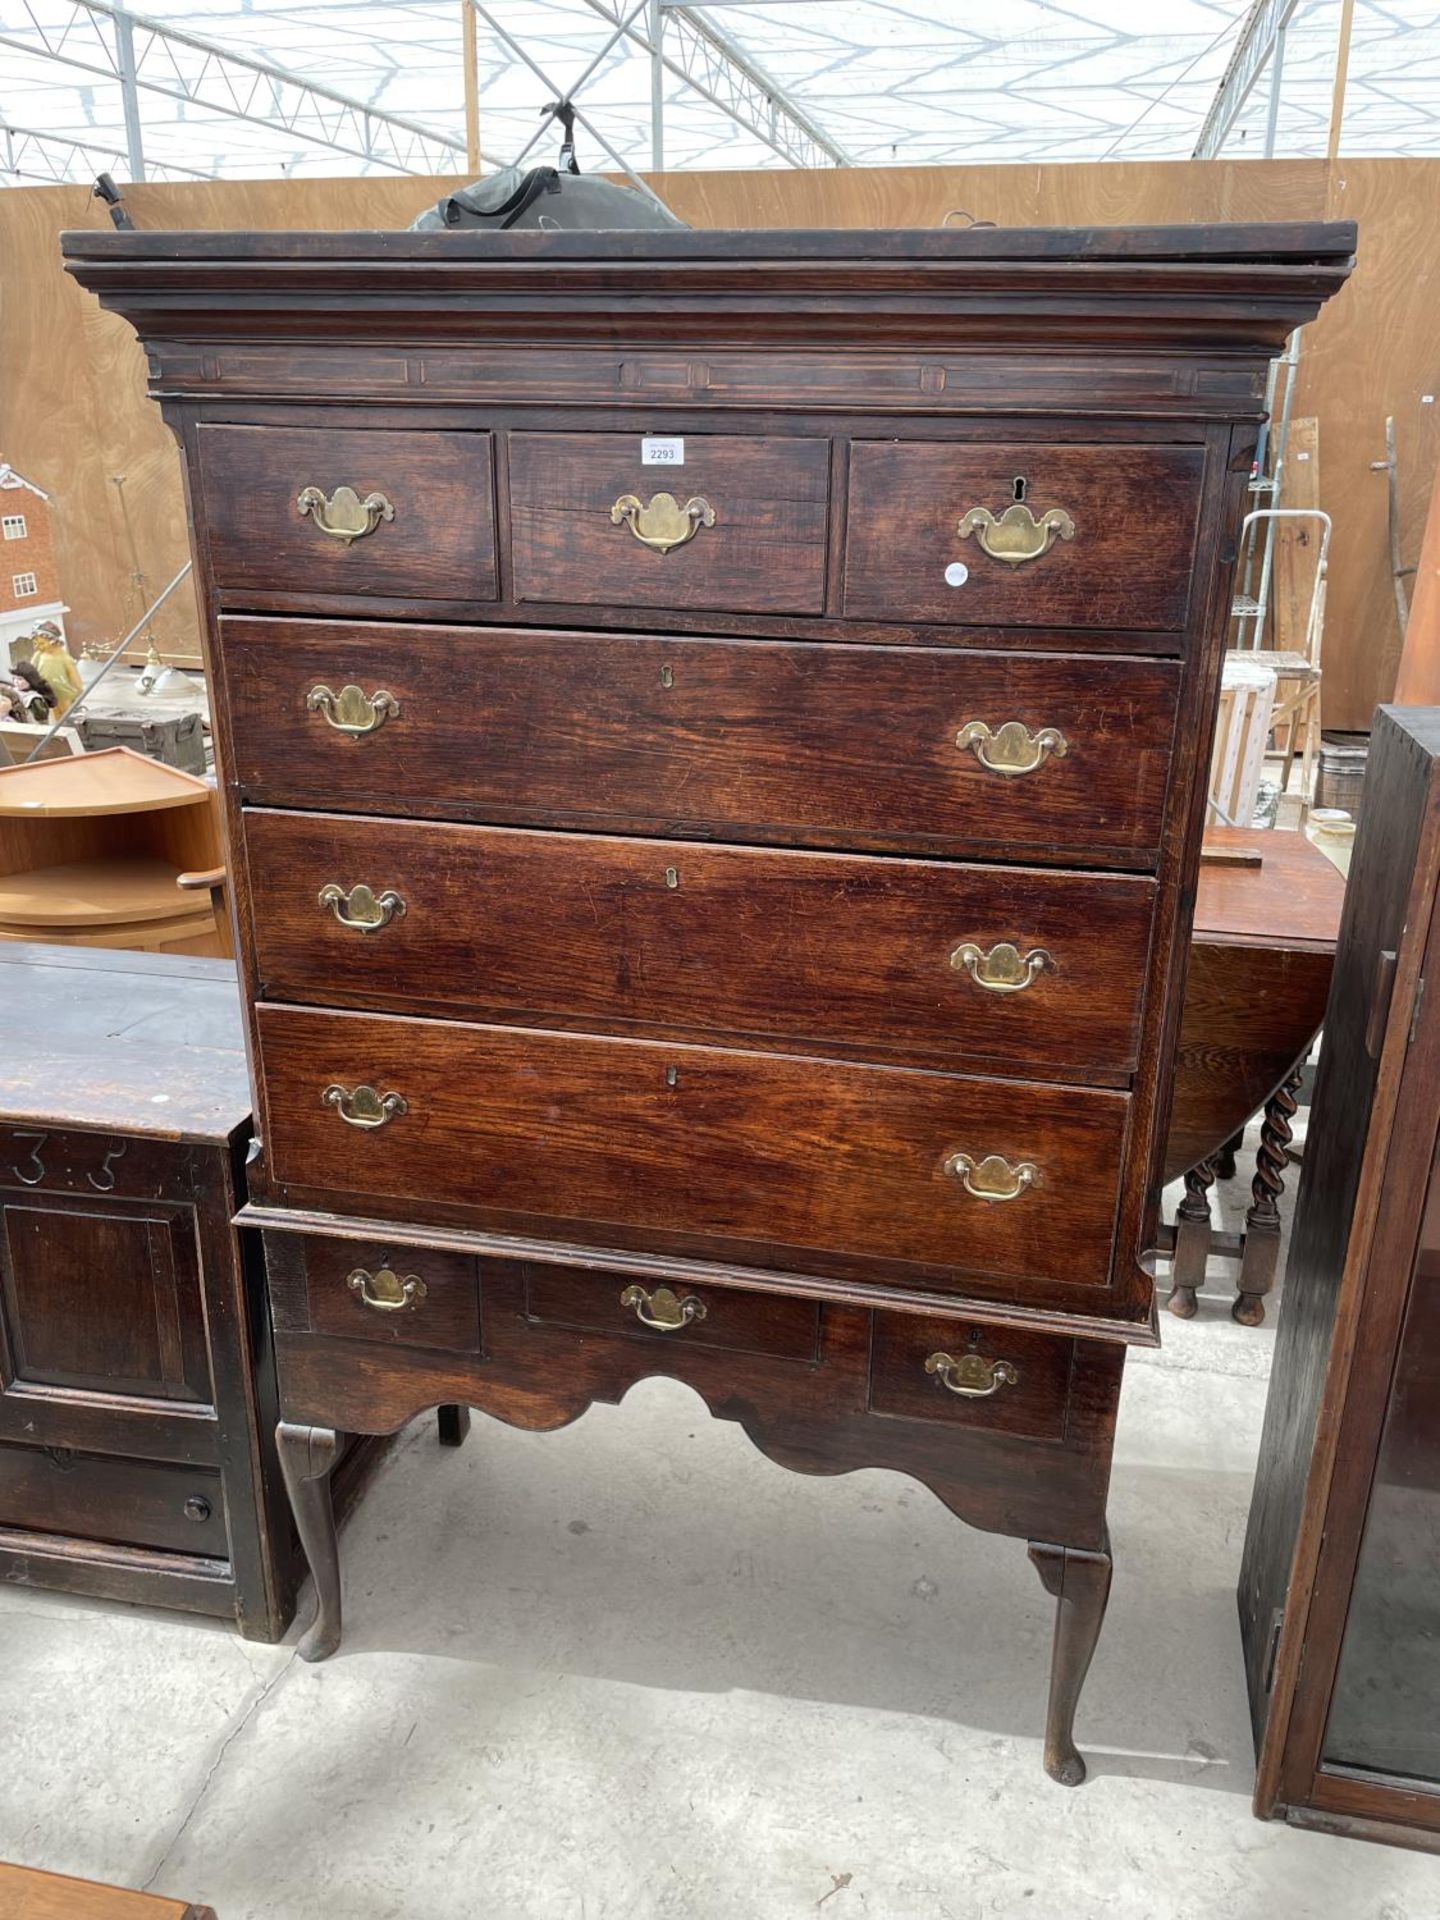 A GEORGE III OAK CHEST ON STAND, THE BASE ON FRONT CABRIOLE LEGS, WITH THREE DRAWERS, THE UPPER